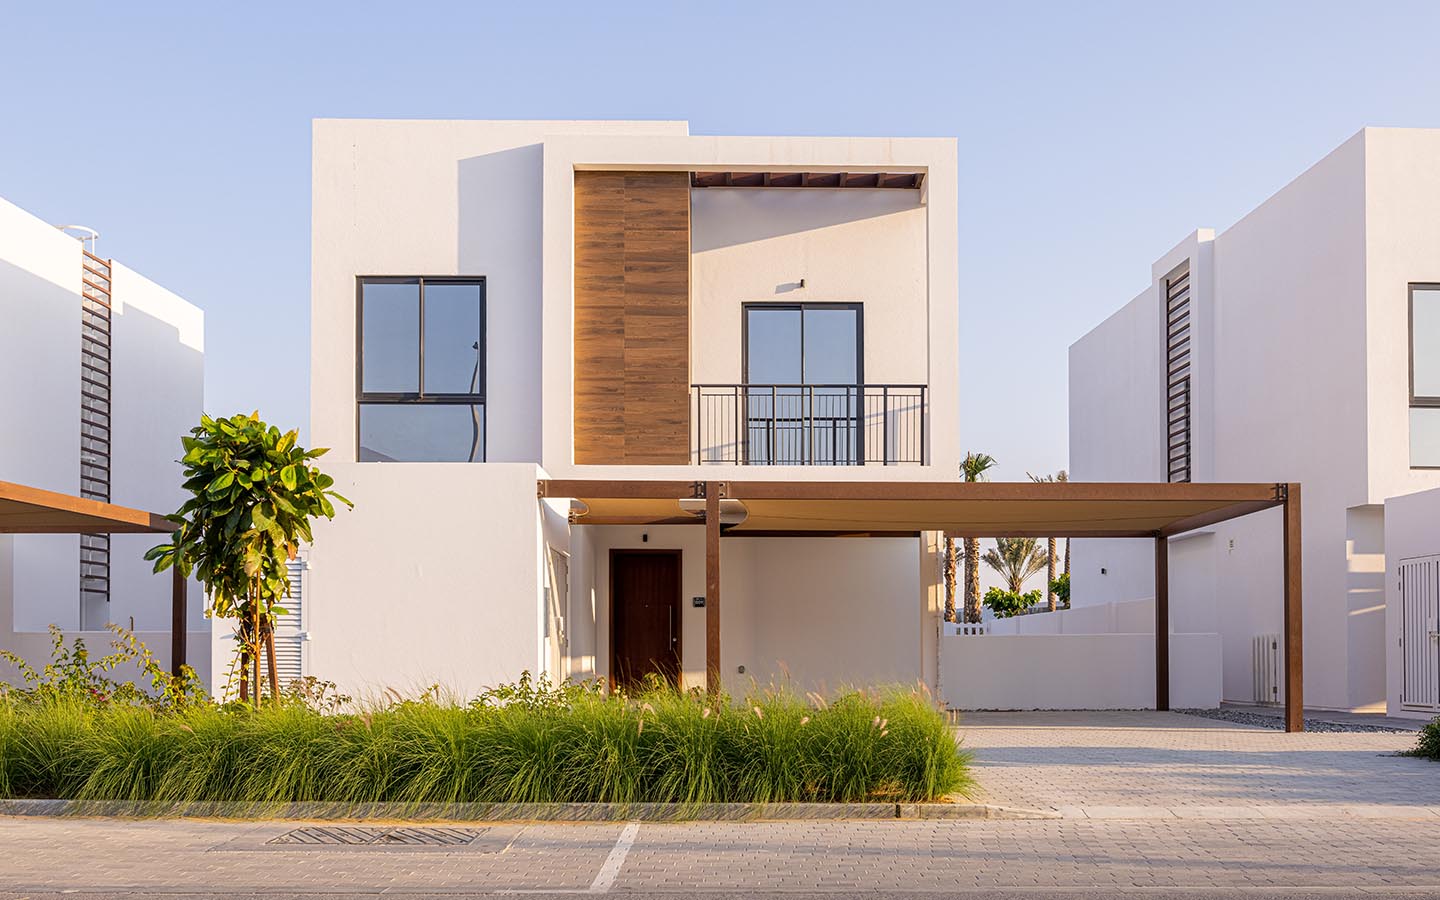 JVC is a top choice to rent 4-bed villas under AED 200k in Dubai